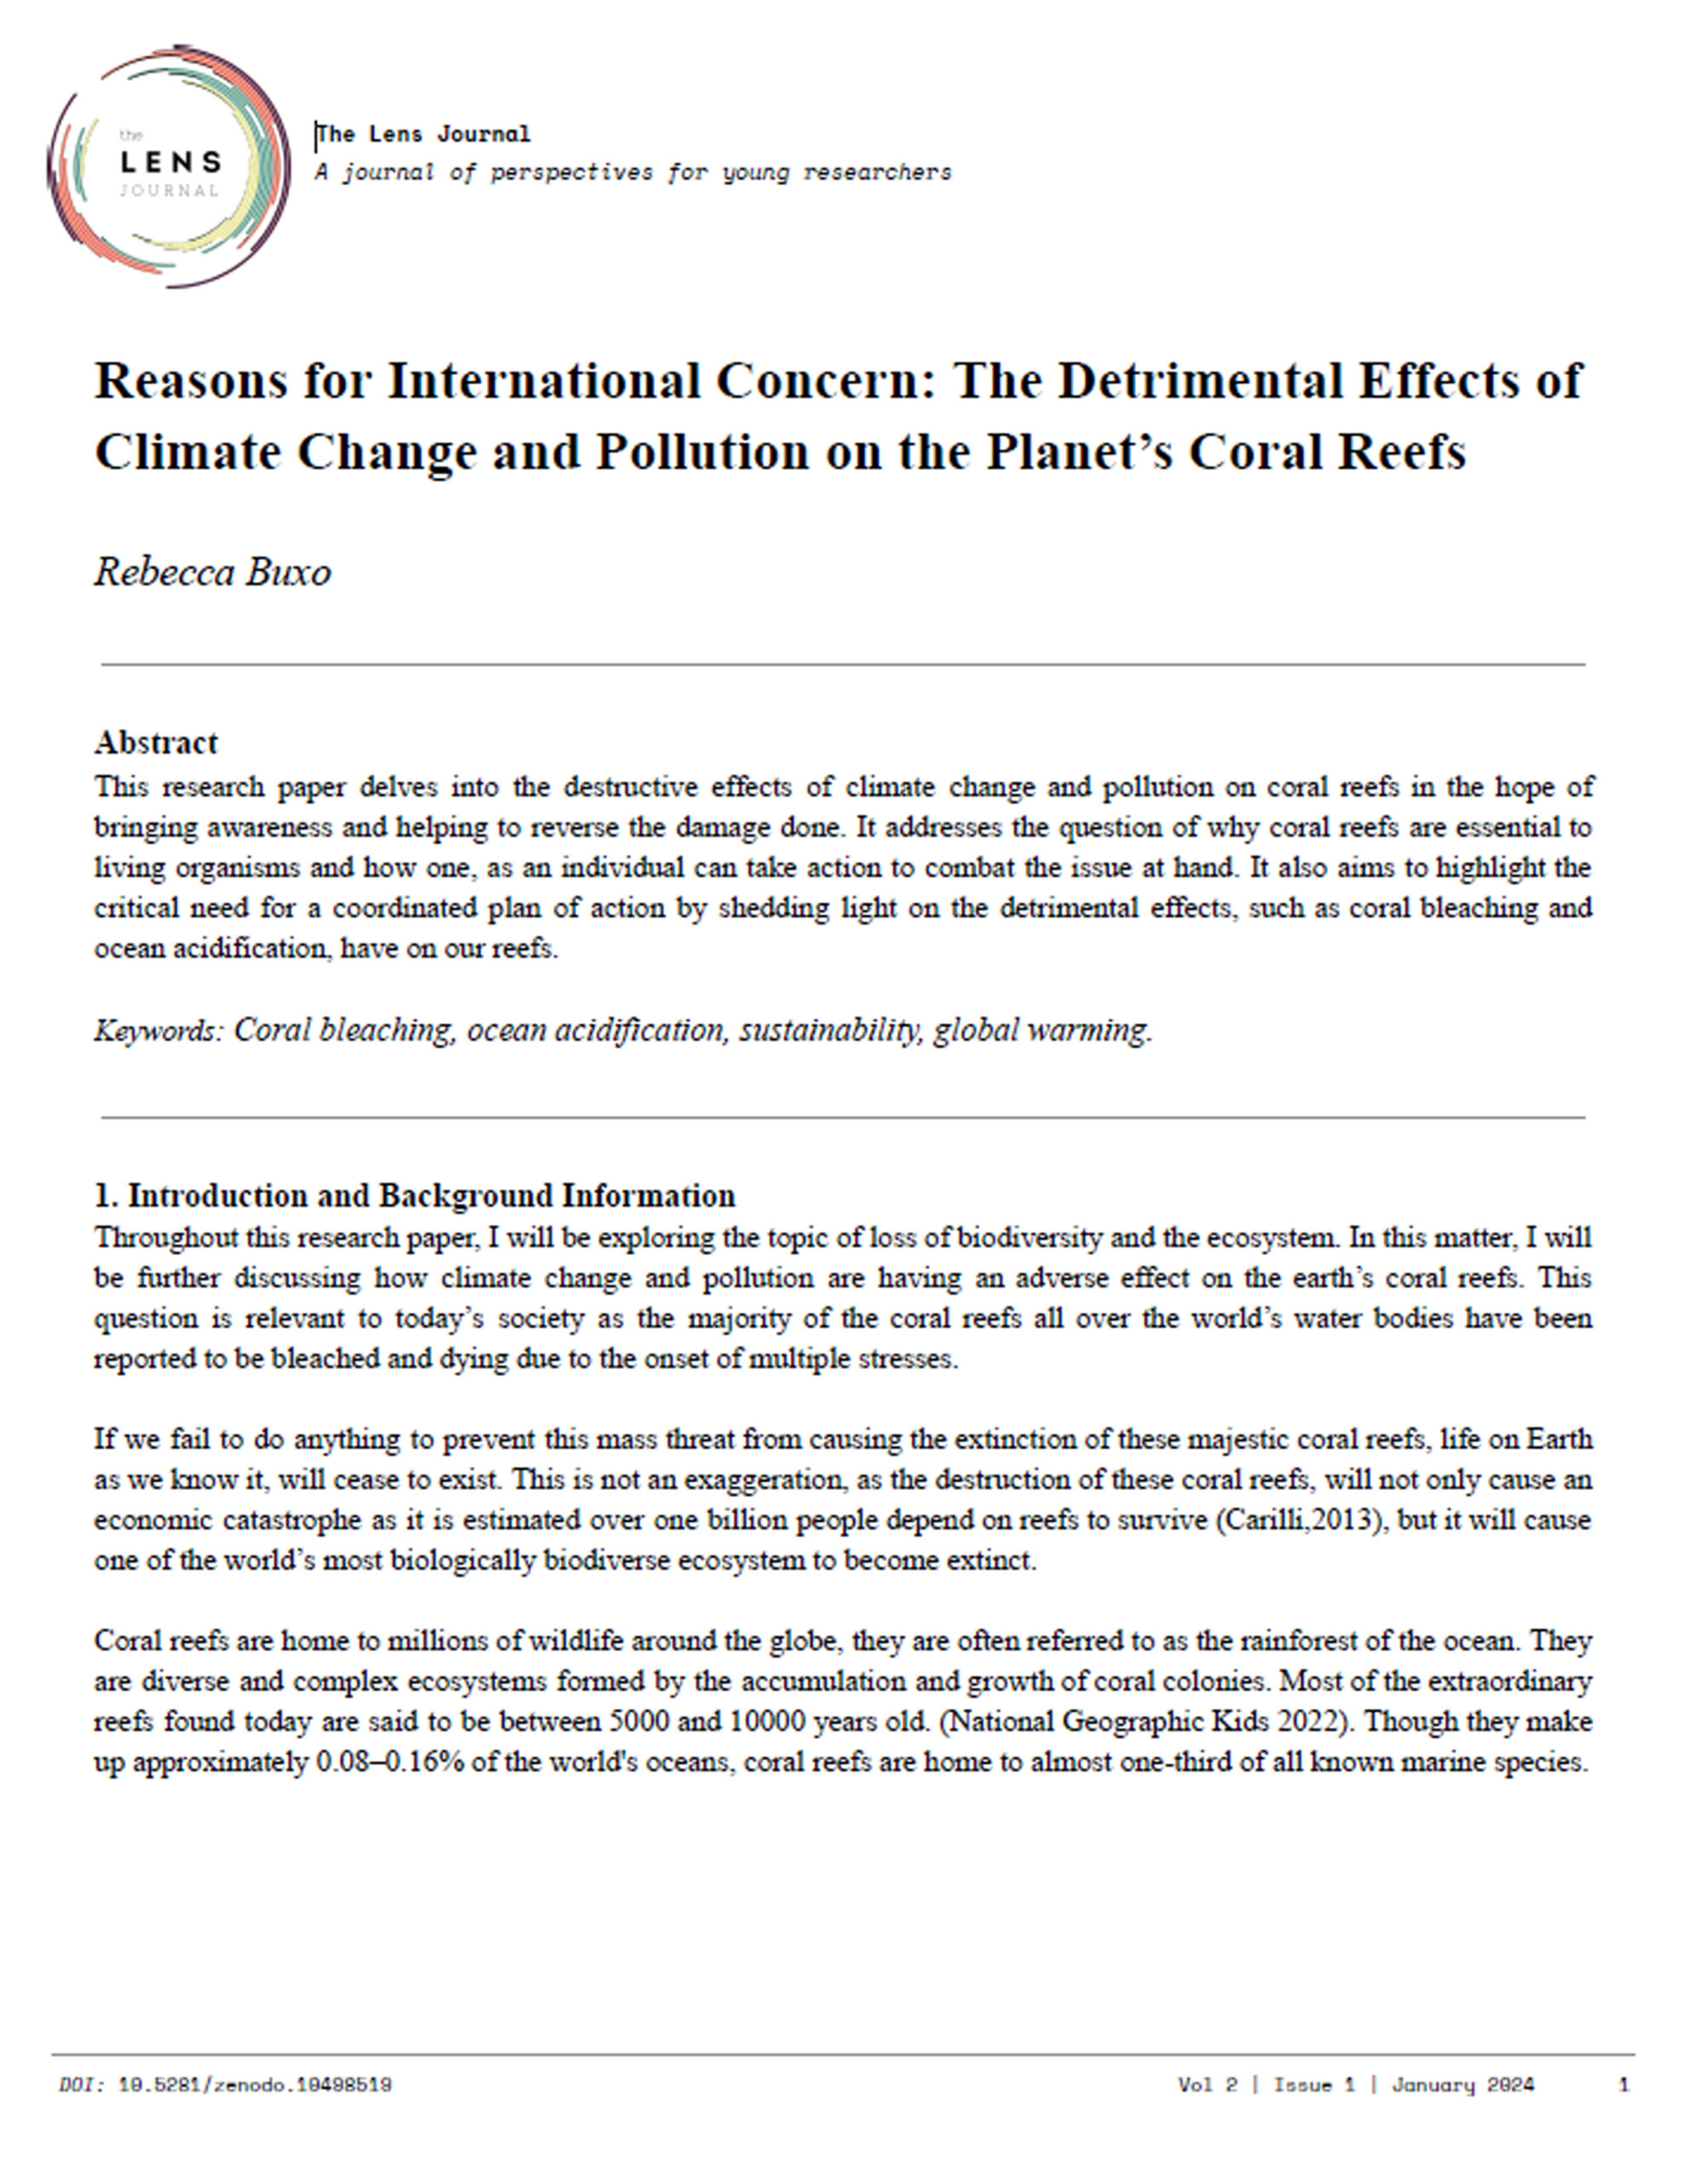 Reasons for International Concern: The Detrimental Effects of Climate Change and Pollution on the Planet’s Coral Reefs